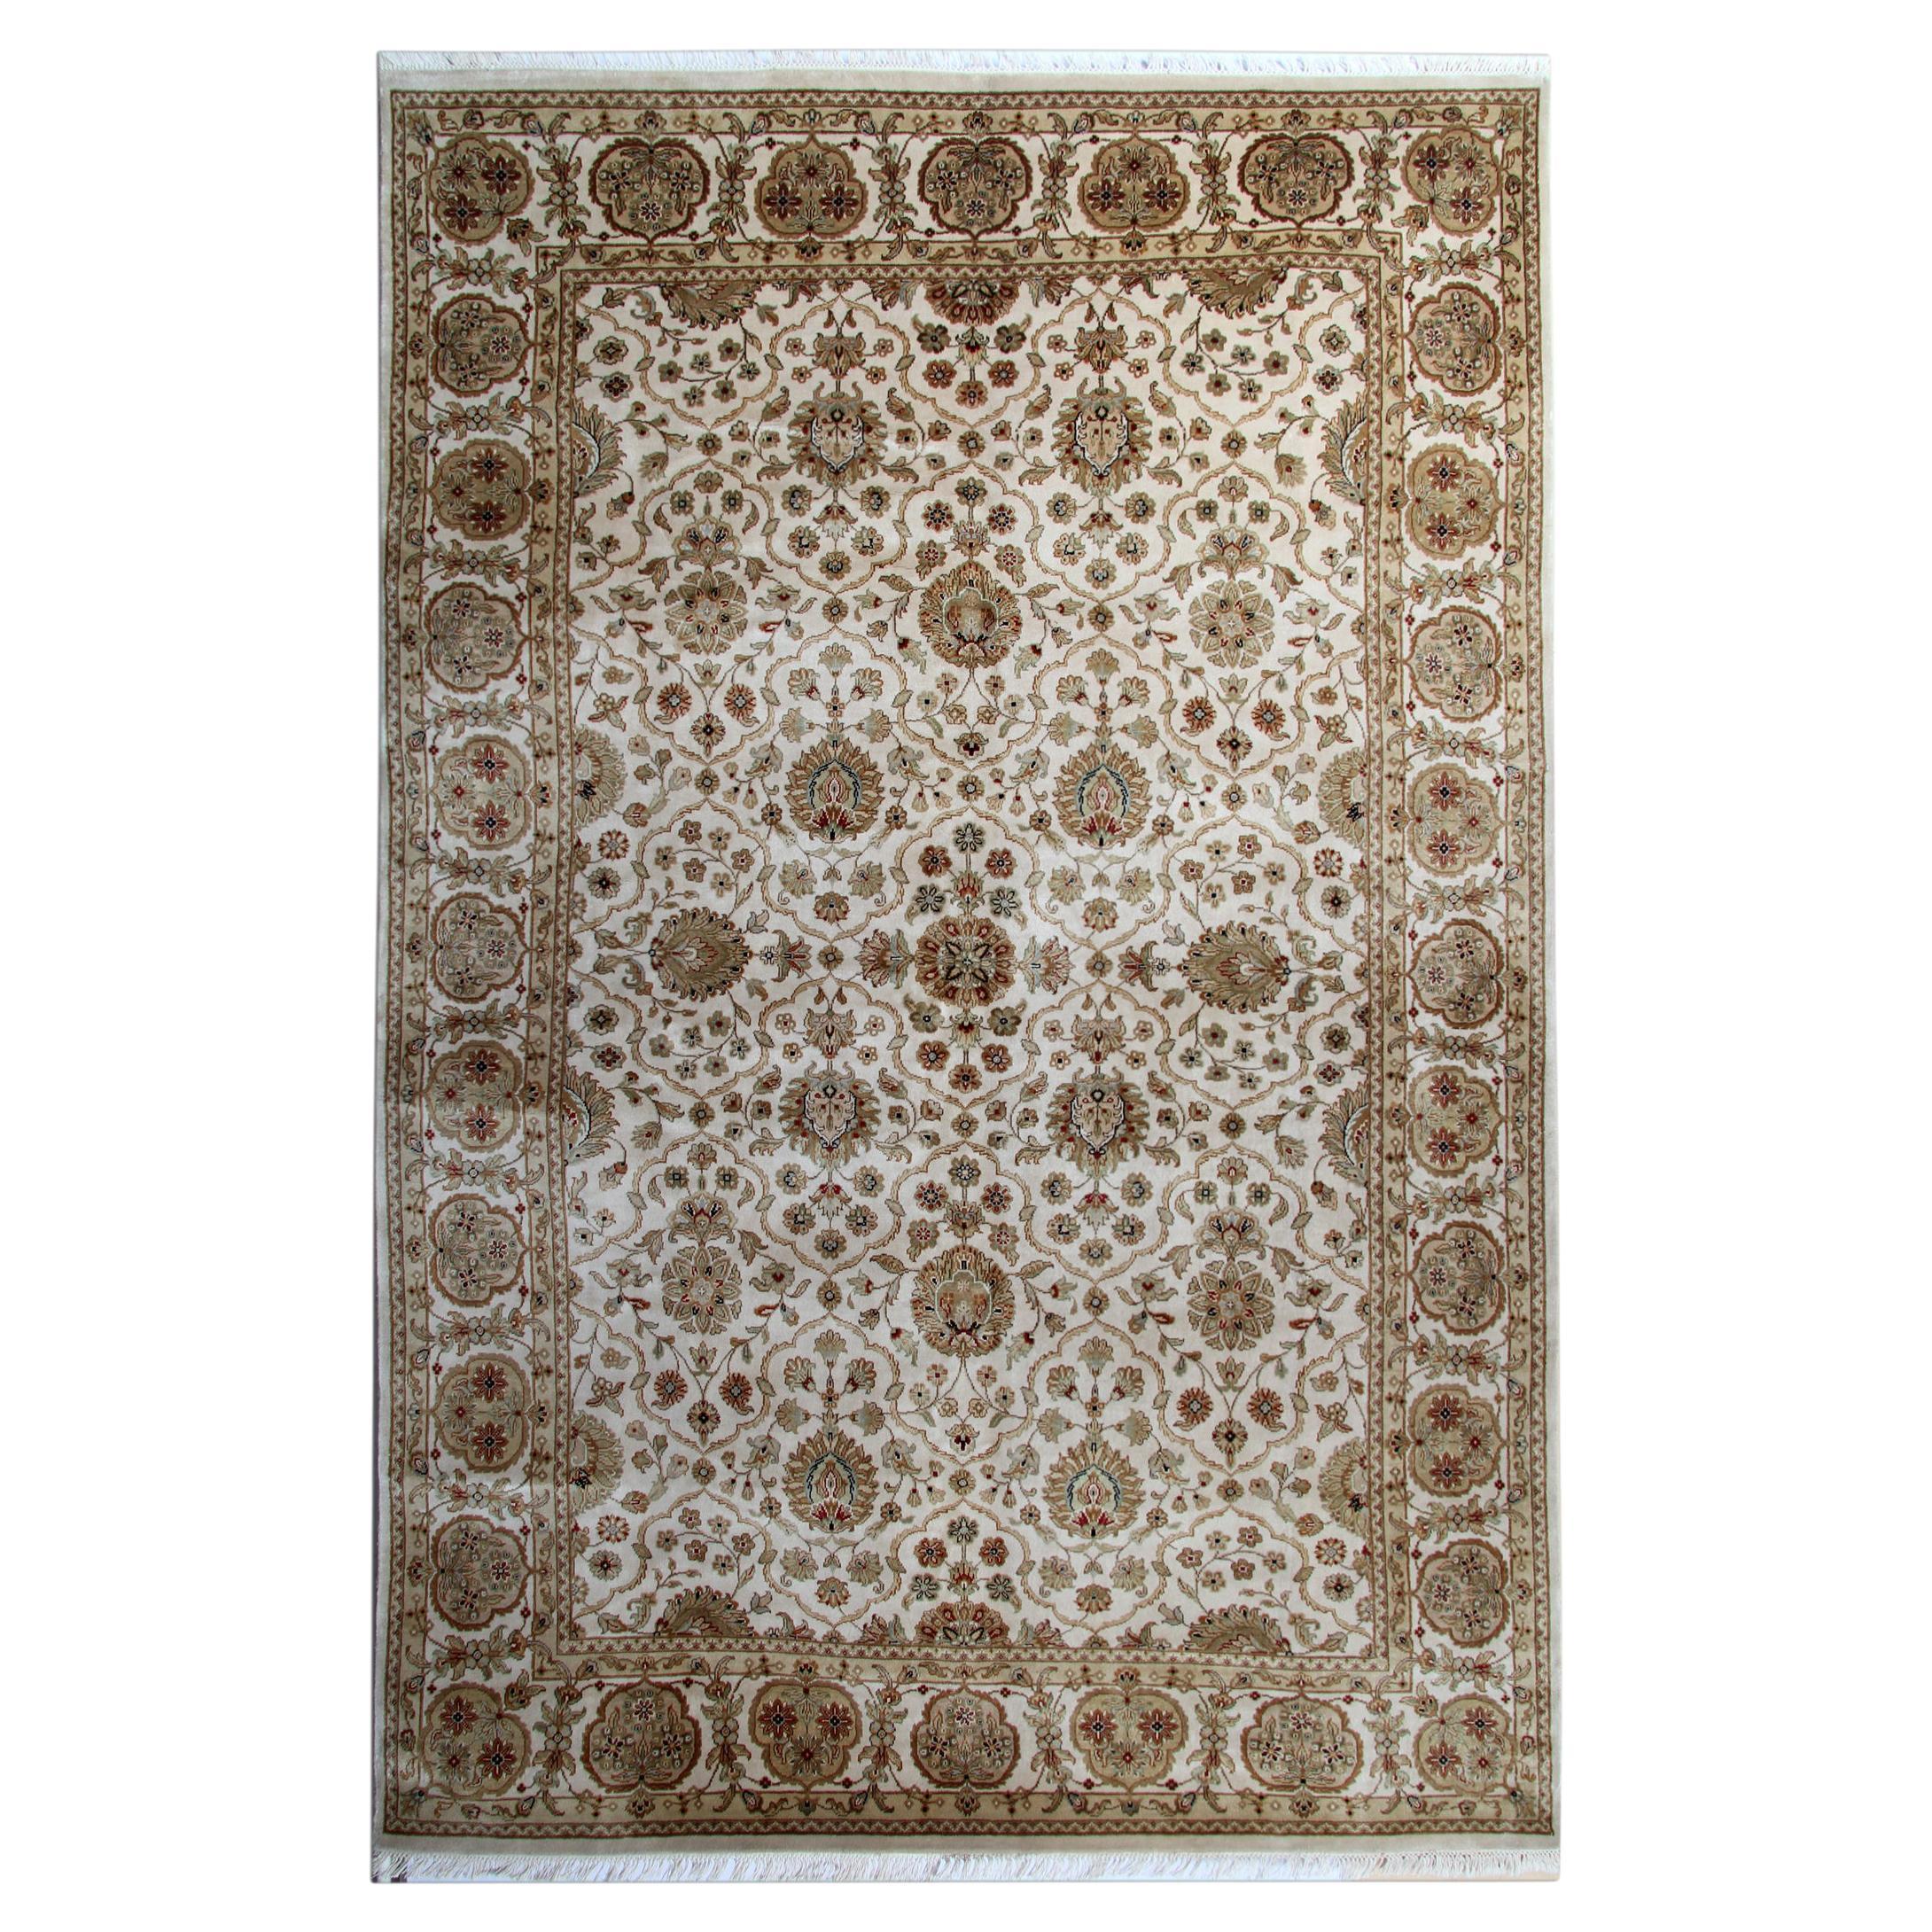 Traditional Rug Wool Ziegler Style Carpet Handmade Oriental Area Rug For Sale